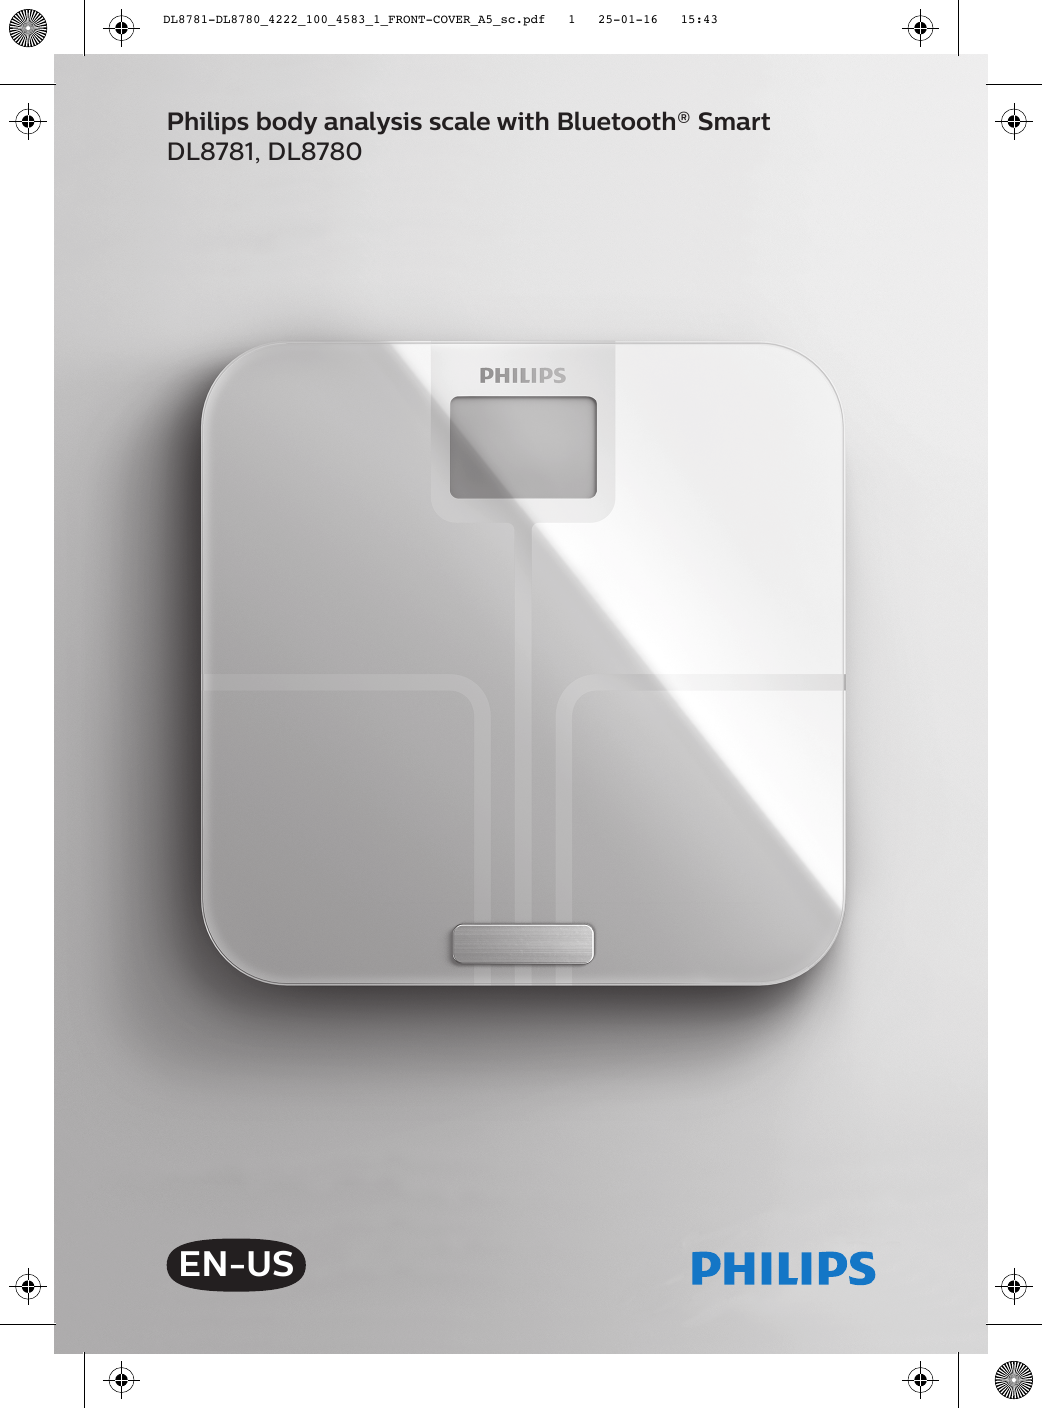 EN-USPhilips body analysis scale with Bluetooth® Smart DL8781, DL8780DL8781-DL8780_4222_100_4583_1_FRONT-COVER_A5_sc.pdf   1   25-01-16   15:43